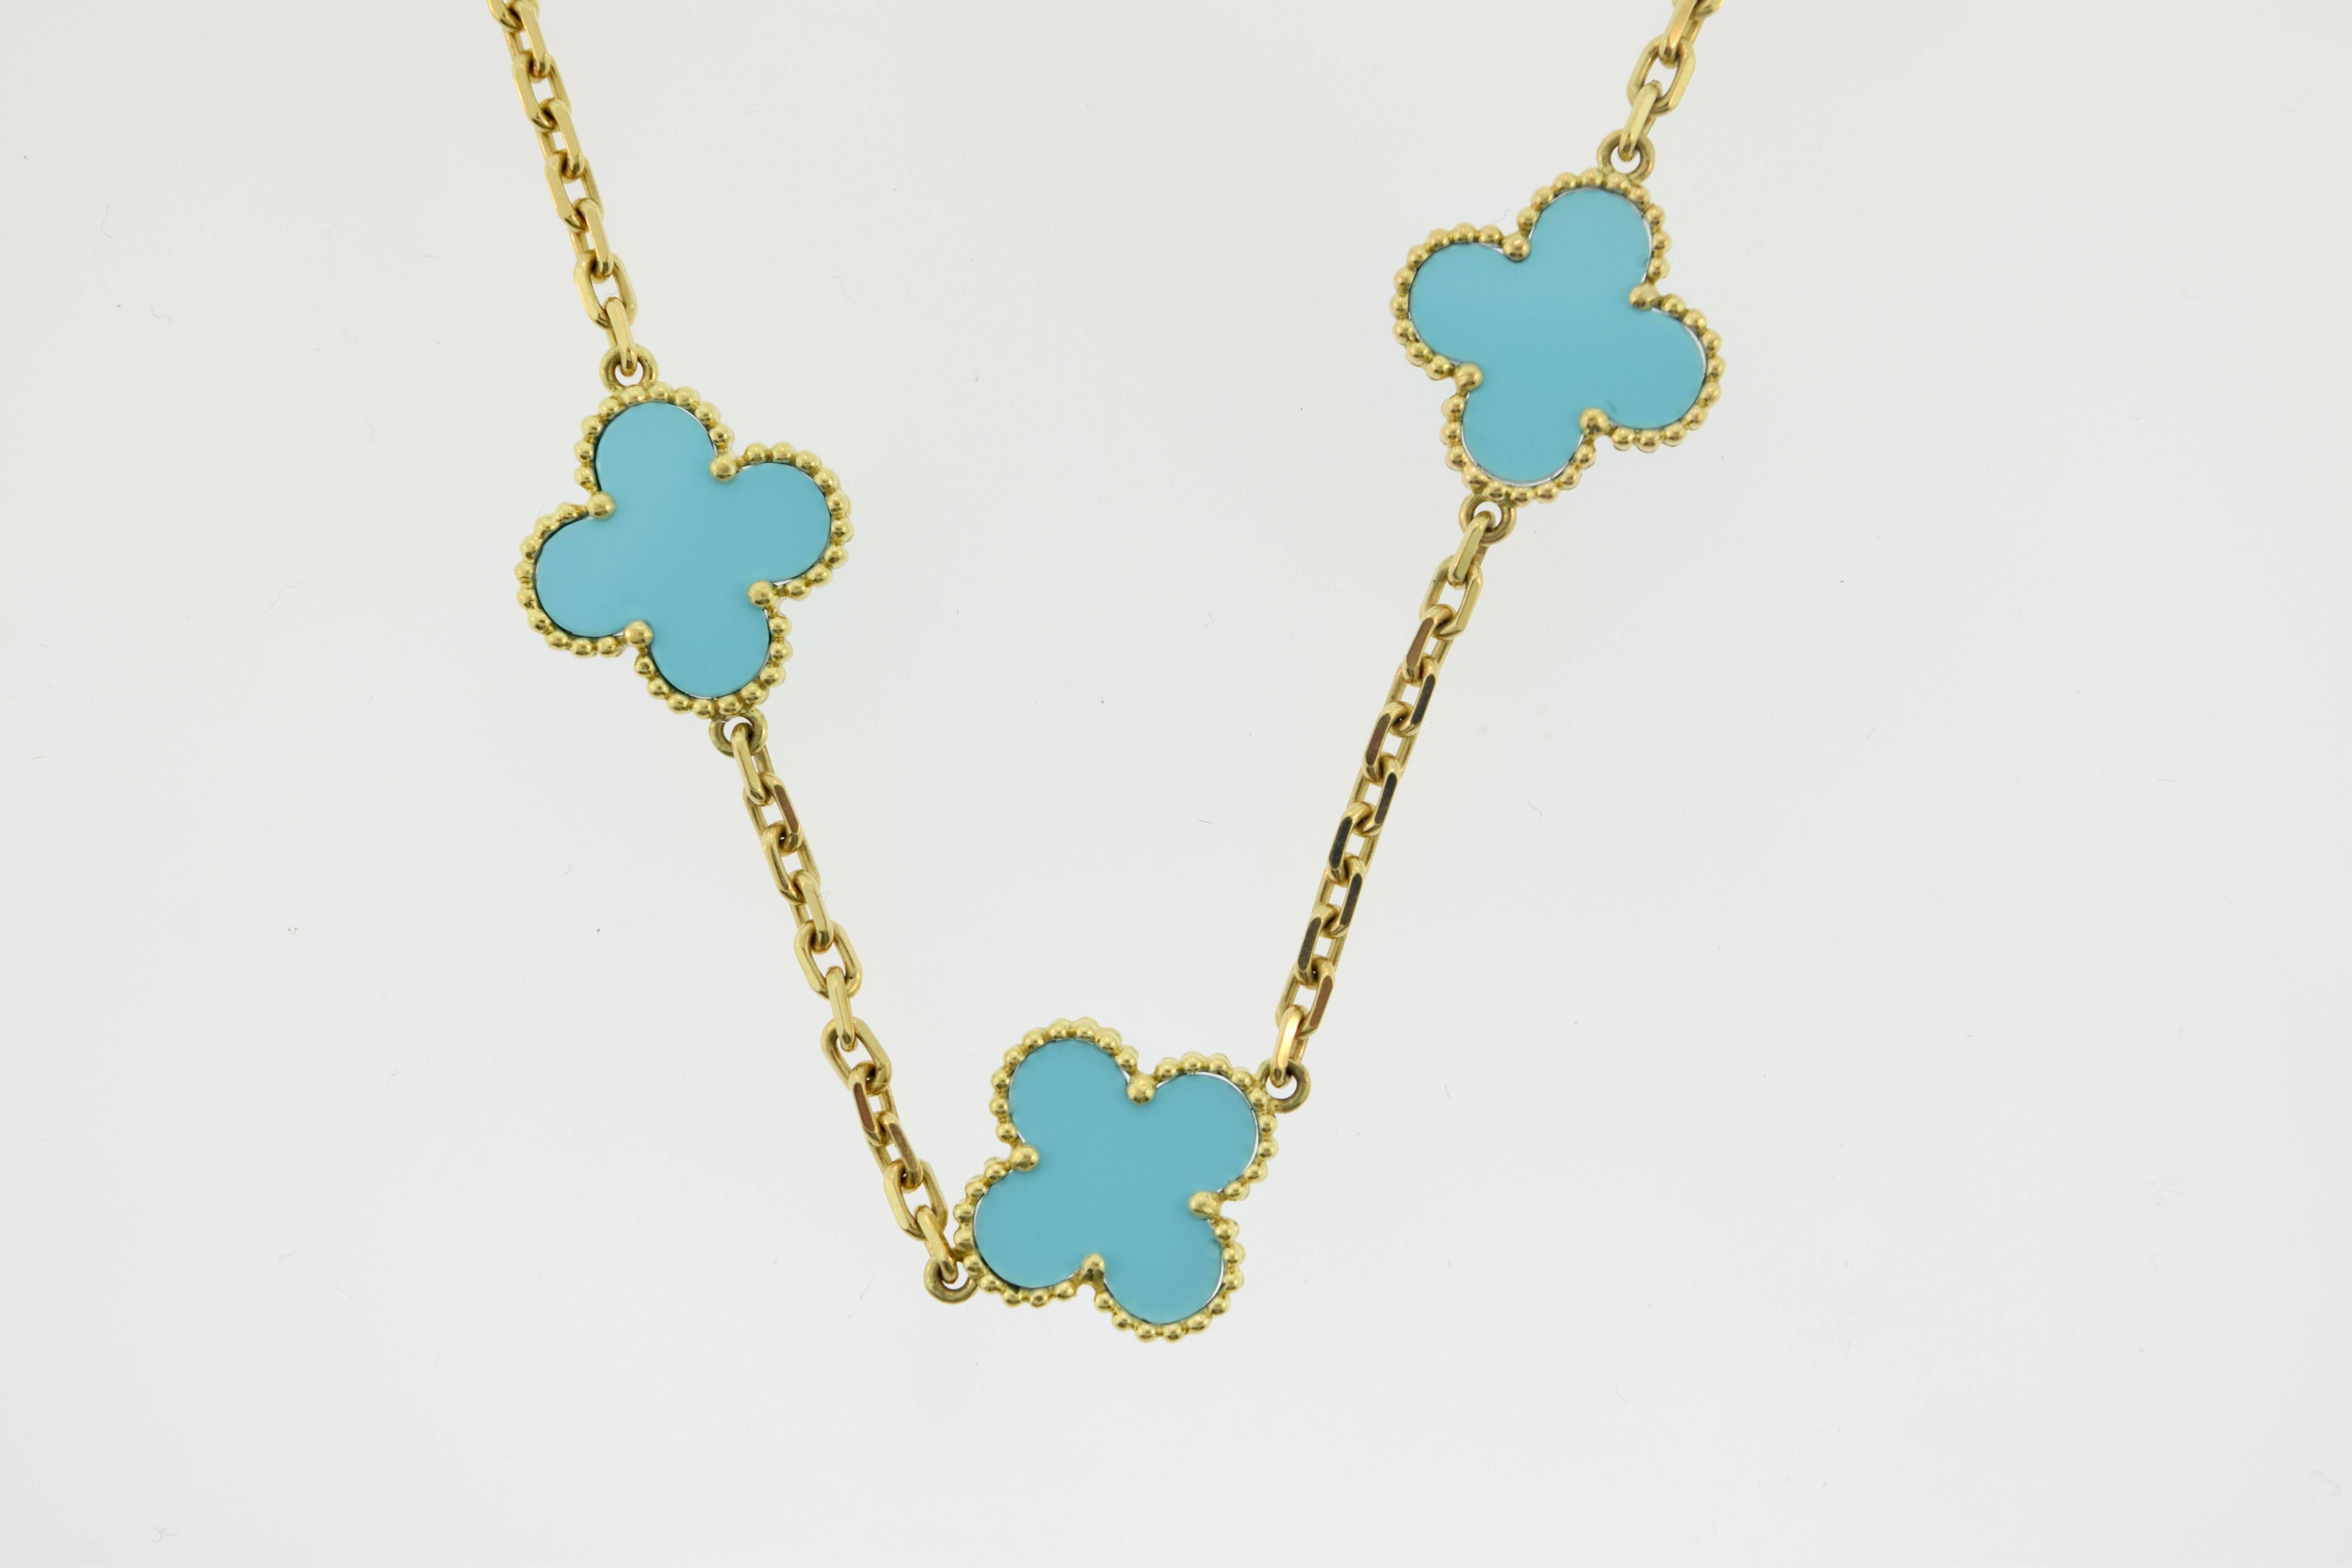 Van Cleef & Arpels Turquoise Alhambra 10 Motif Necklace In Excellent Condition For Sale In Miami, FL